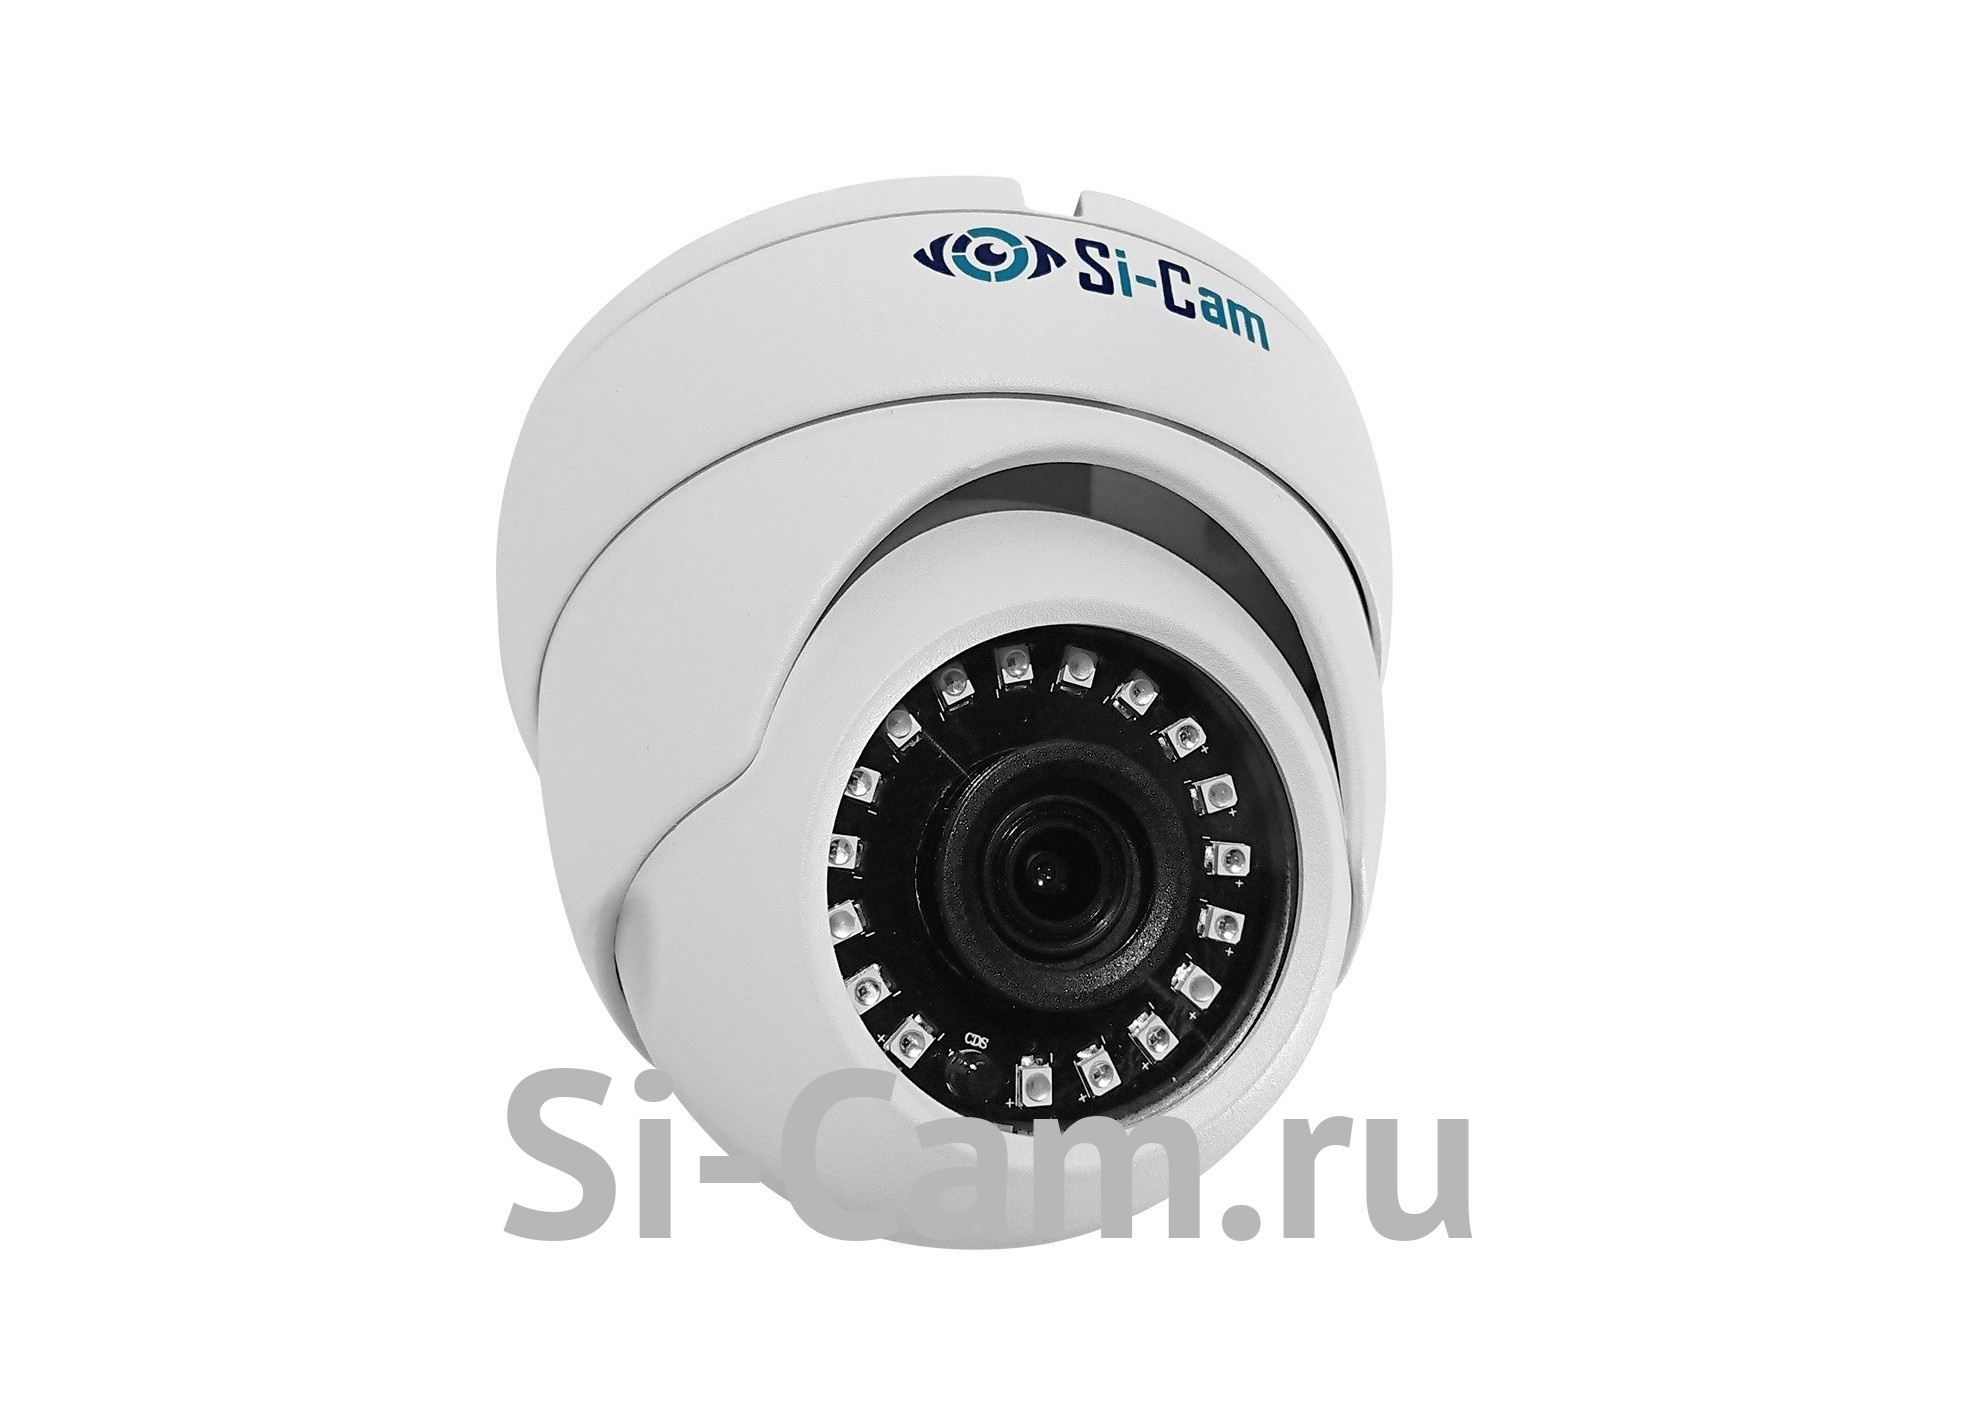 Si-Cam SC-DSW302F IR    IP  (3Mpx, 2304*1296, 25/, FULL COLOR, WDR/HDR)